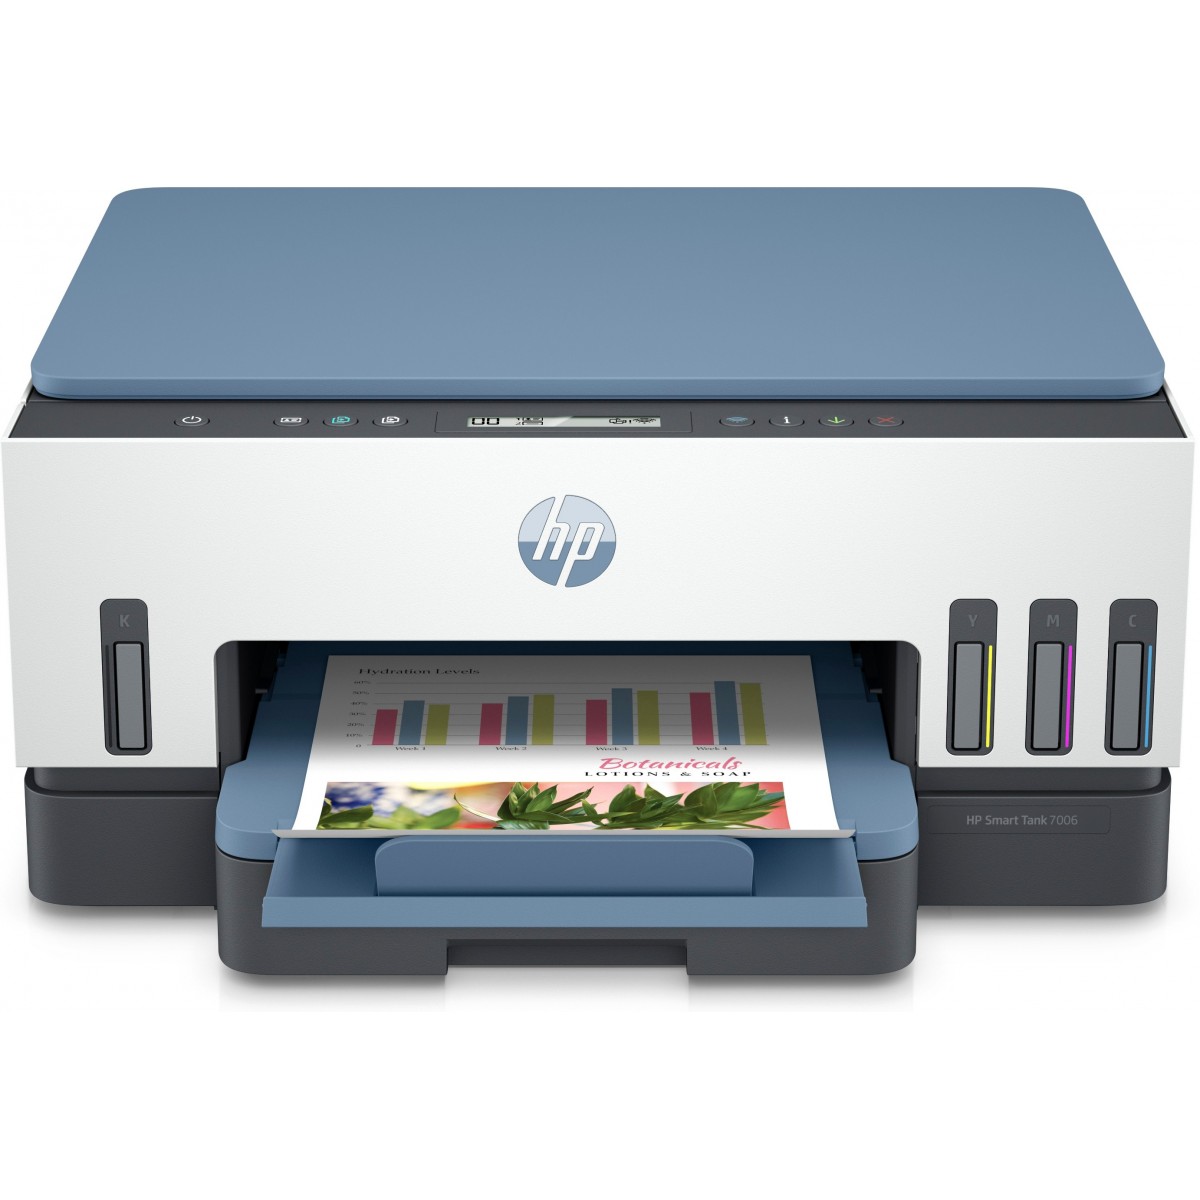 HP Smart Tank 7006 AIO A4 color 9ppm - Inkjet - Colored